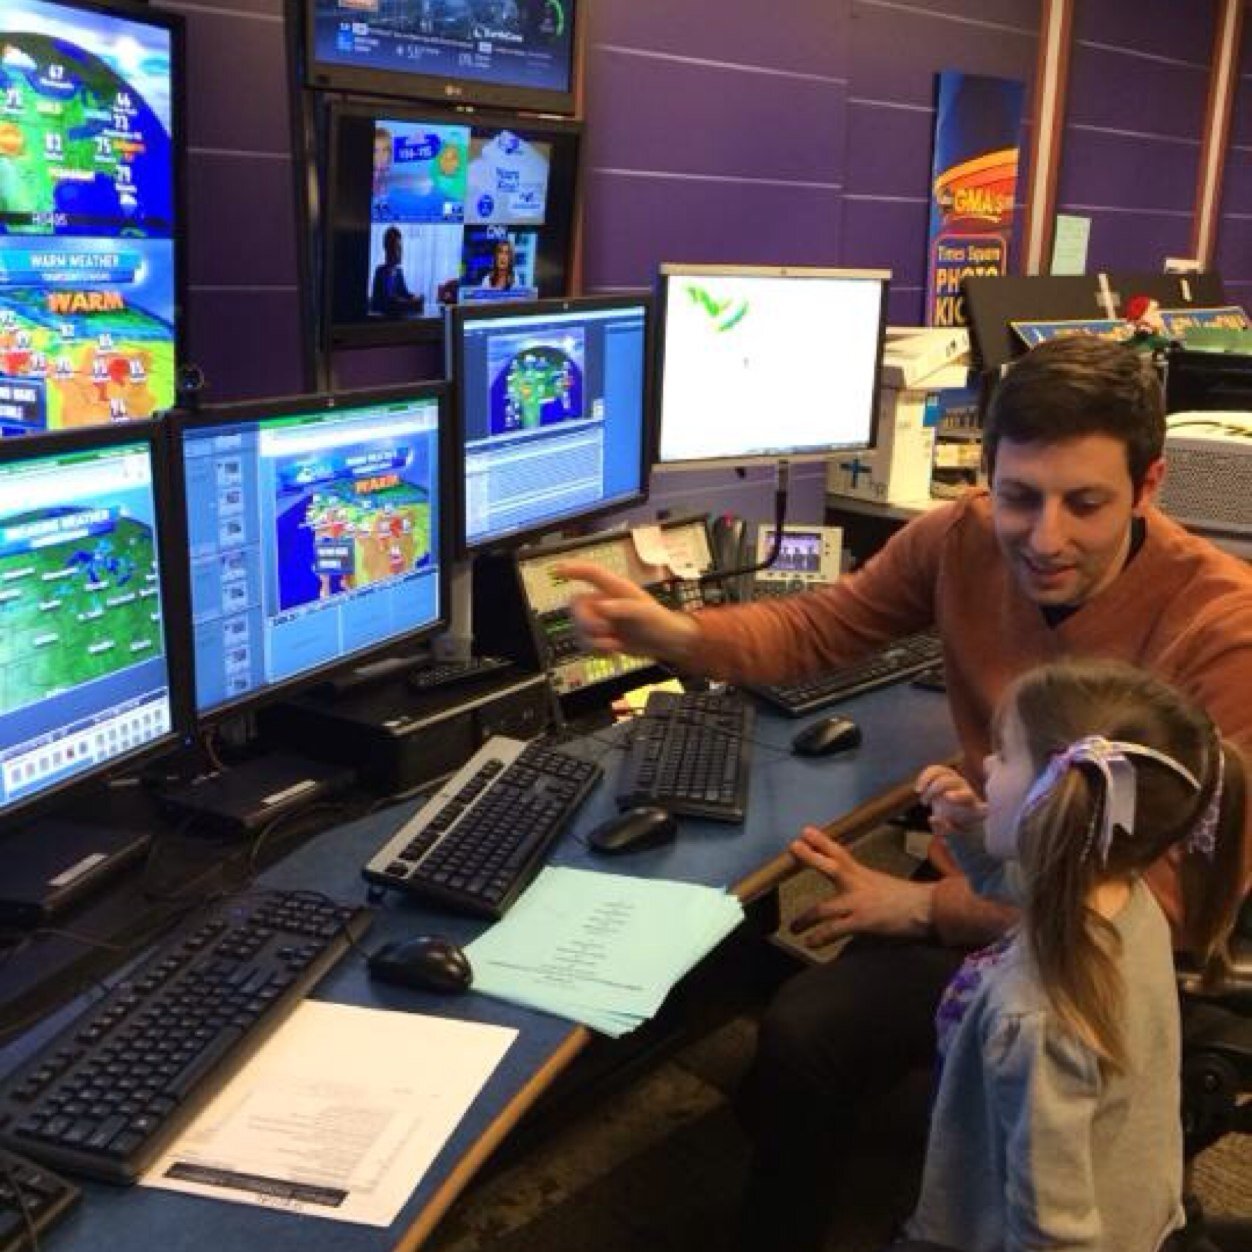 Senior Meteorologist/Weather Producer for ABC News and Good Morning America. UAlbany Grad